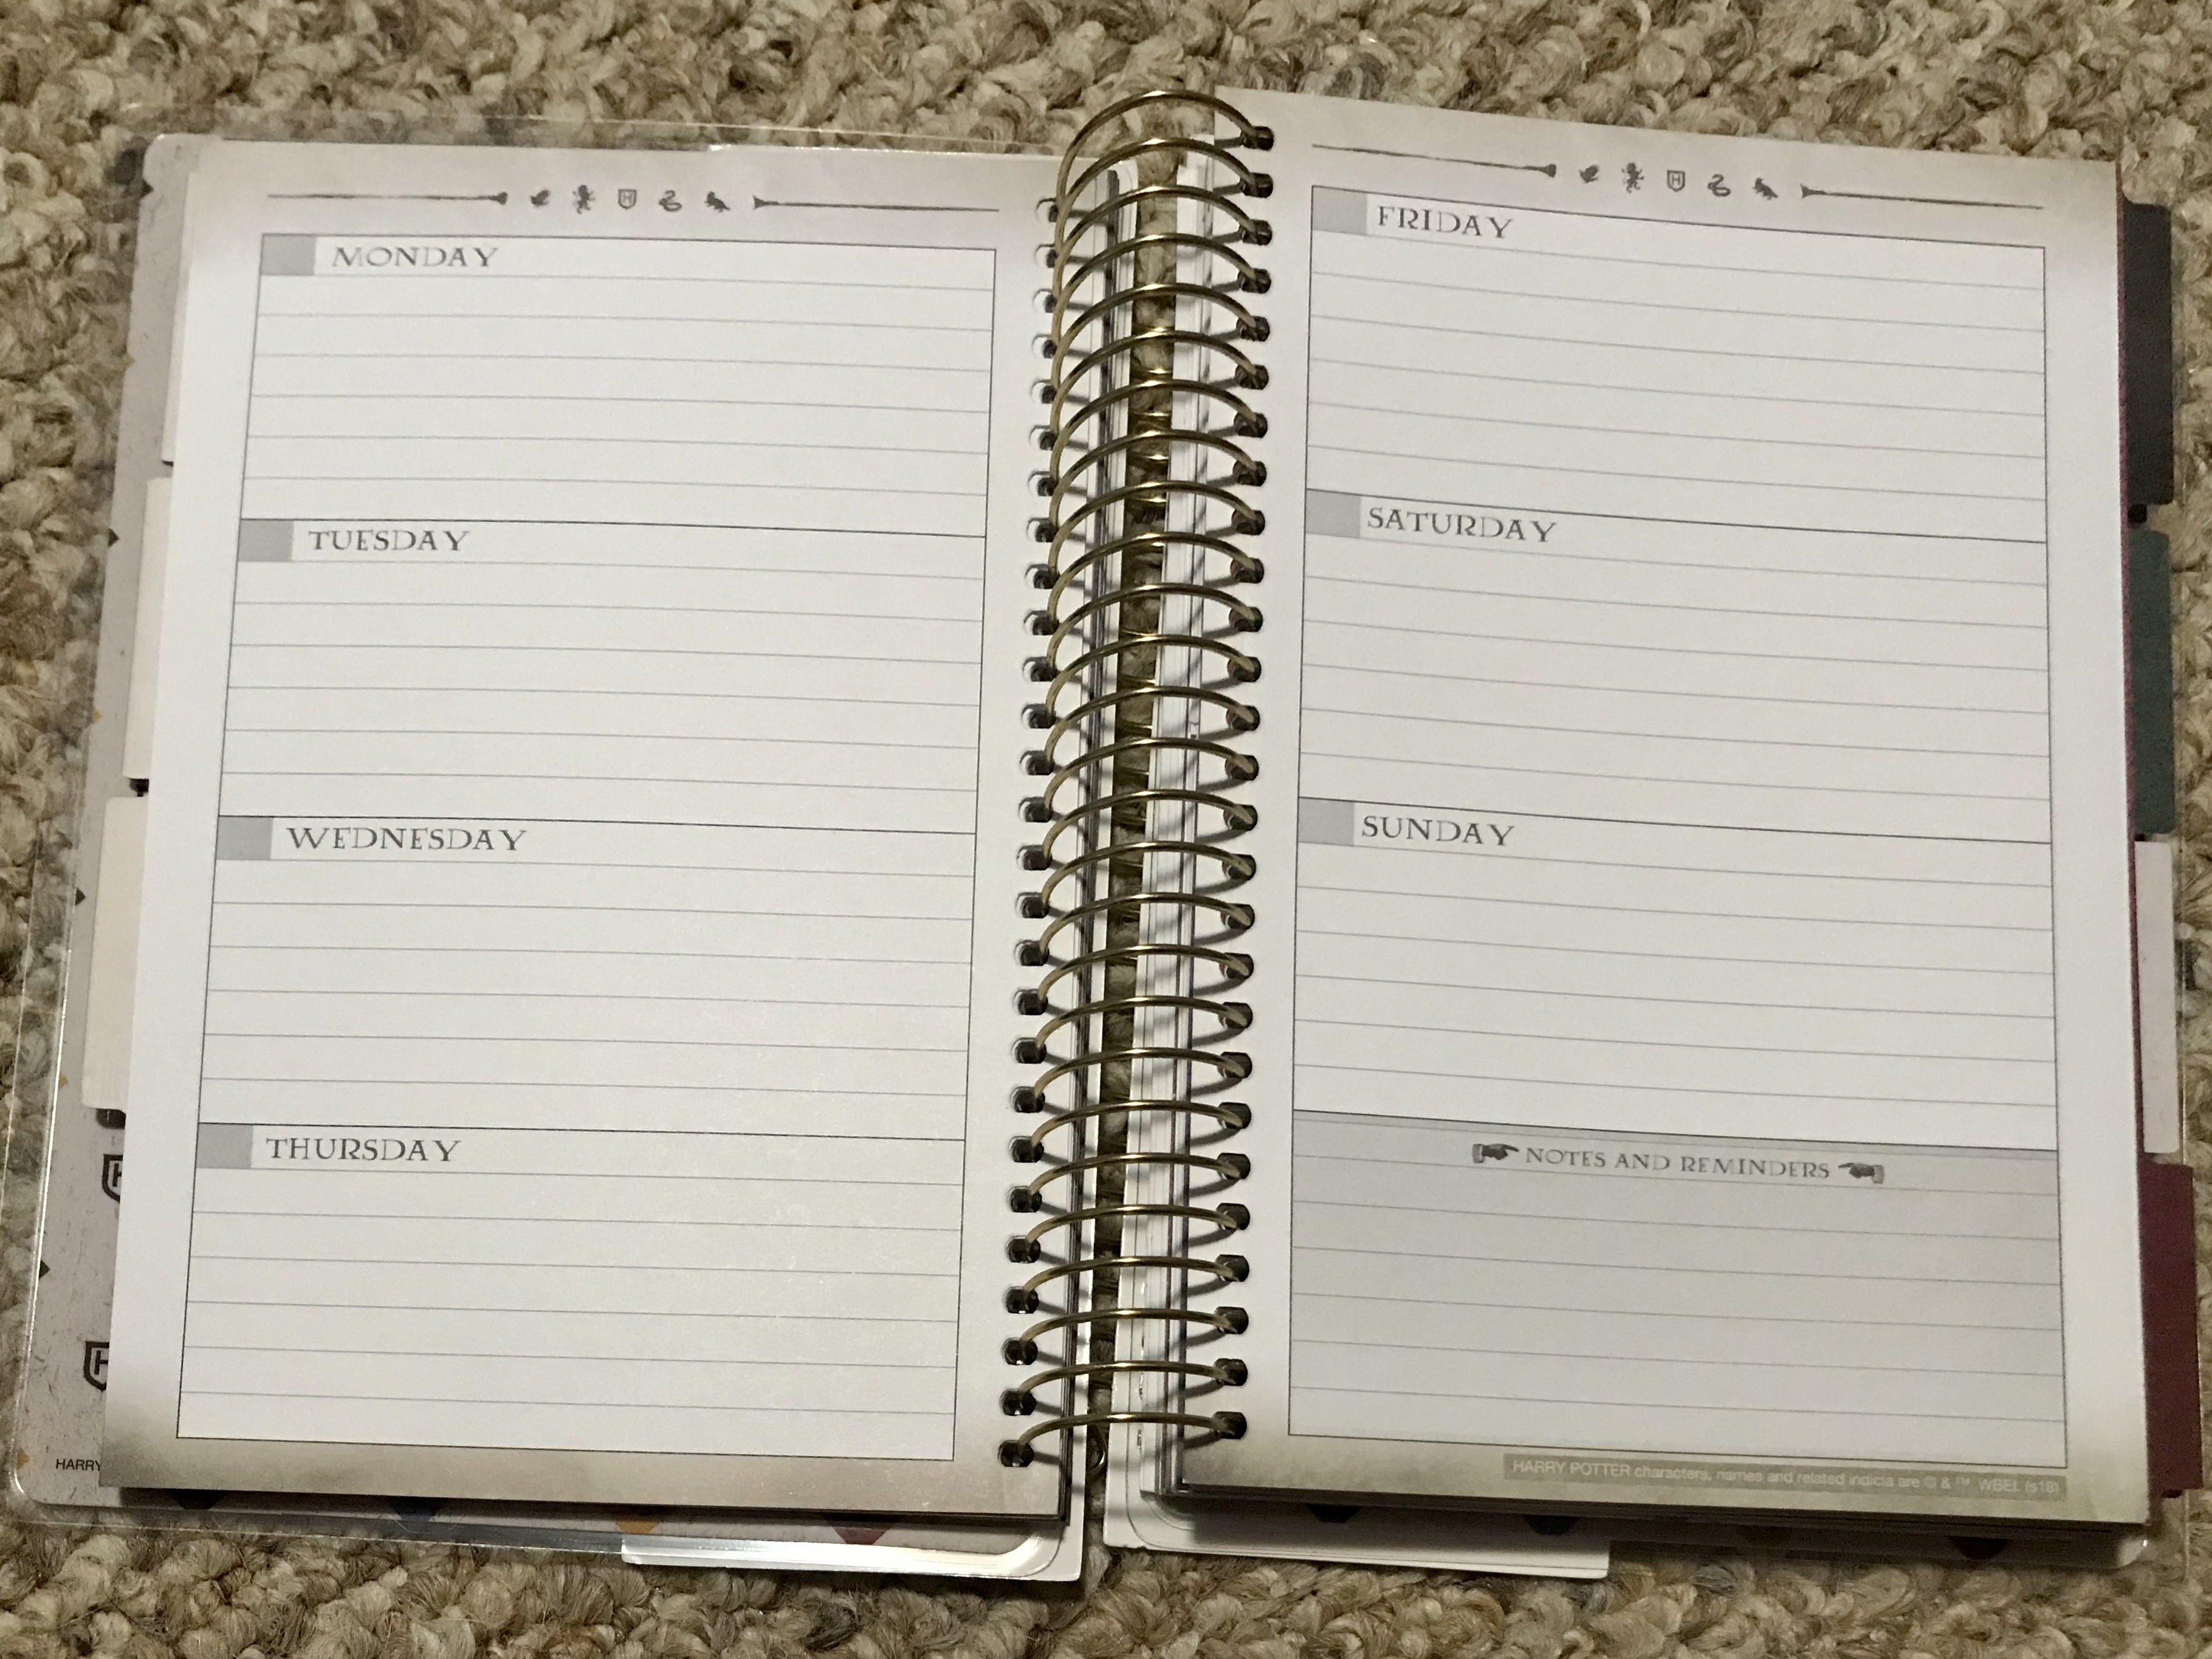 Paper House Productions – mini planner week spread